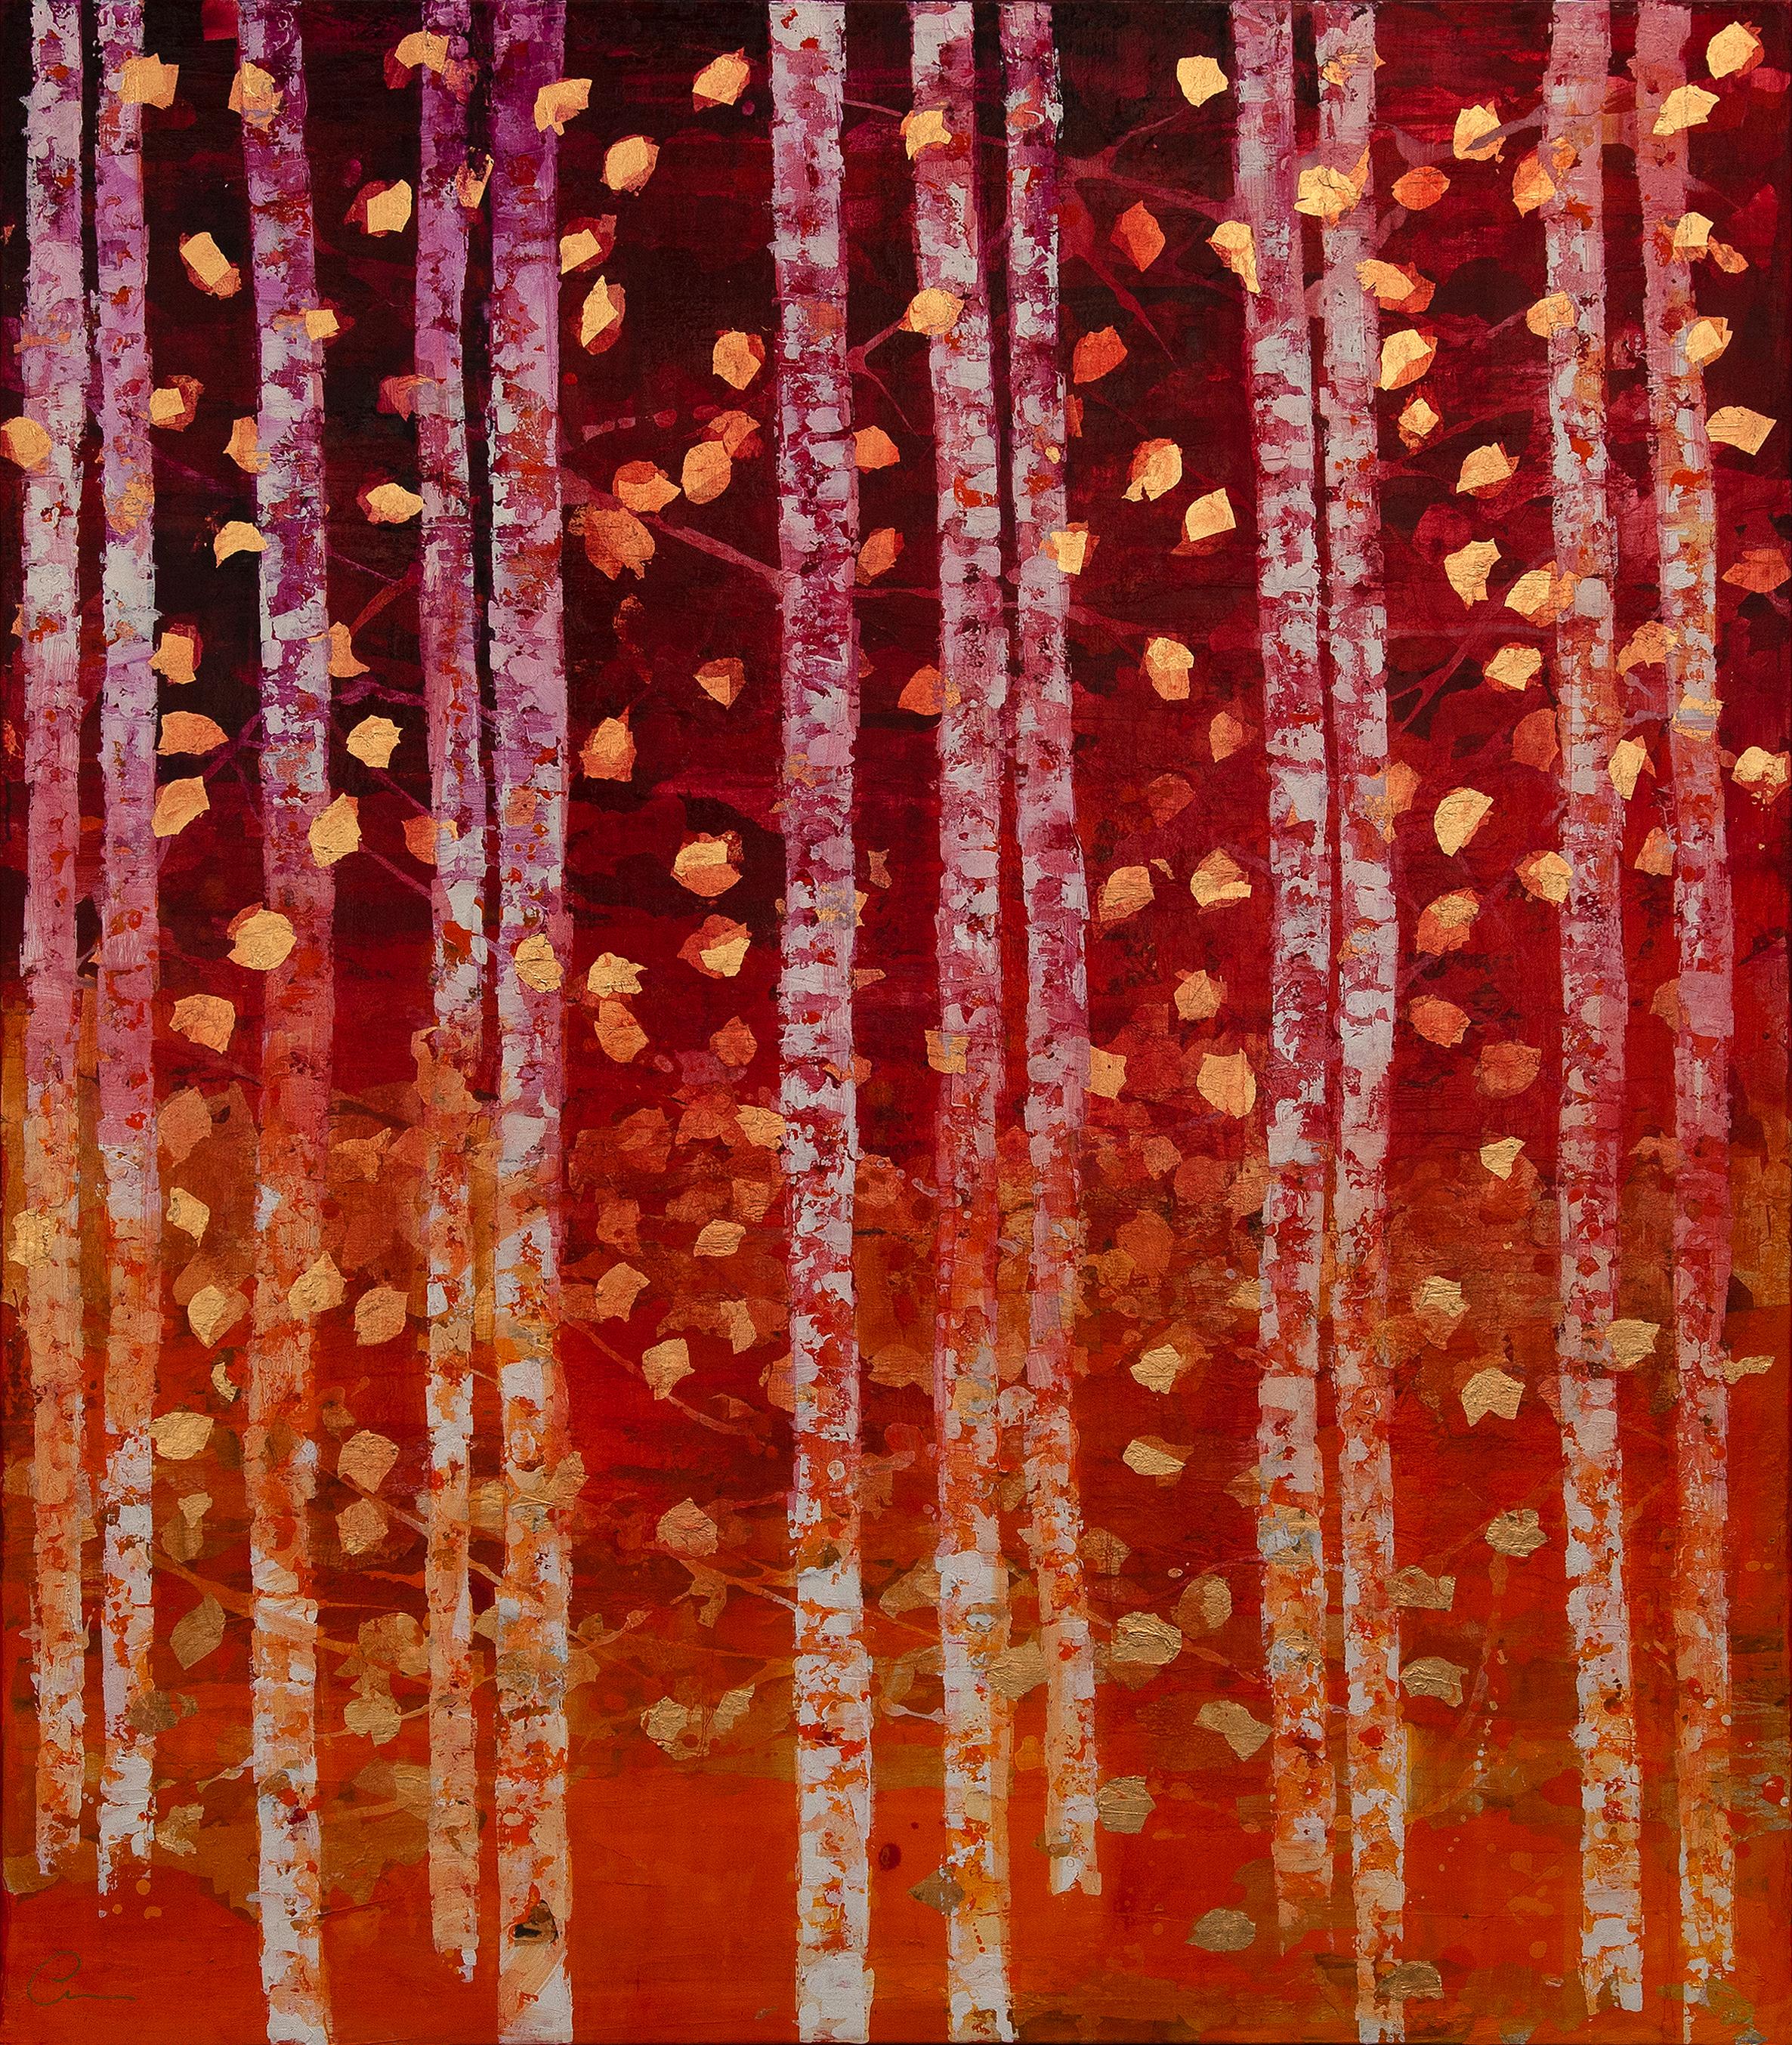 Chelsea Davine Figurative Painting - Sunset In The Forest - 21st Century, Contemporary, Abstract Painting, Gold Leaf